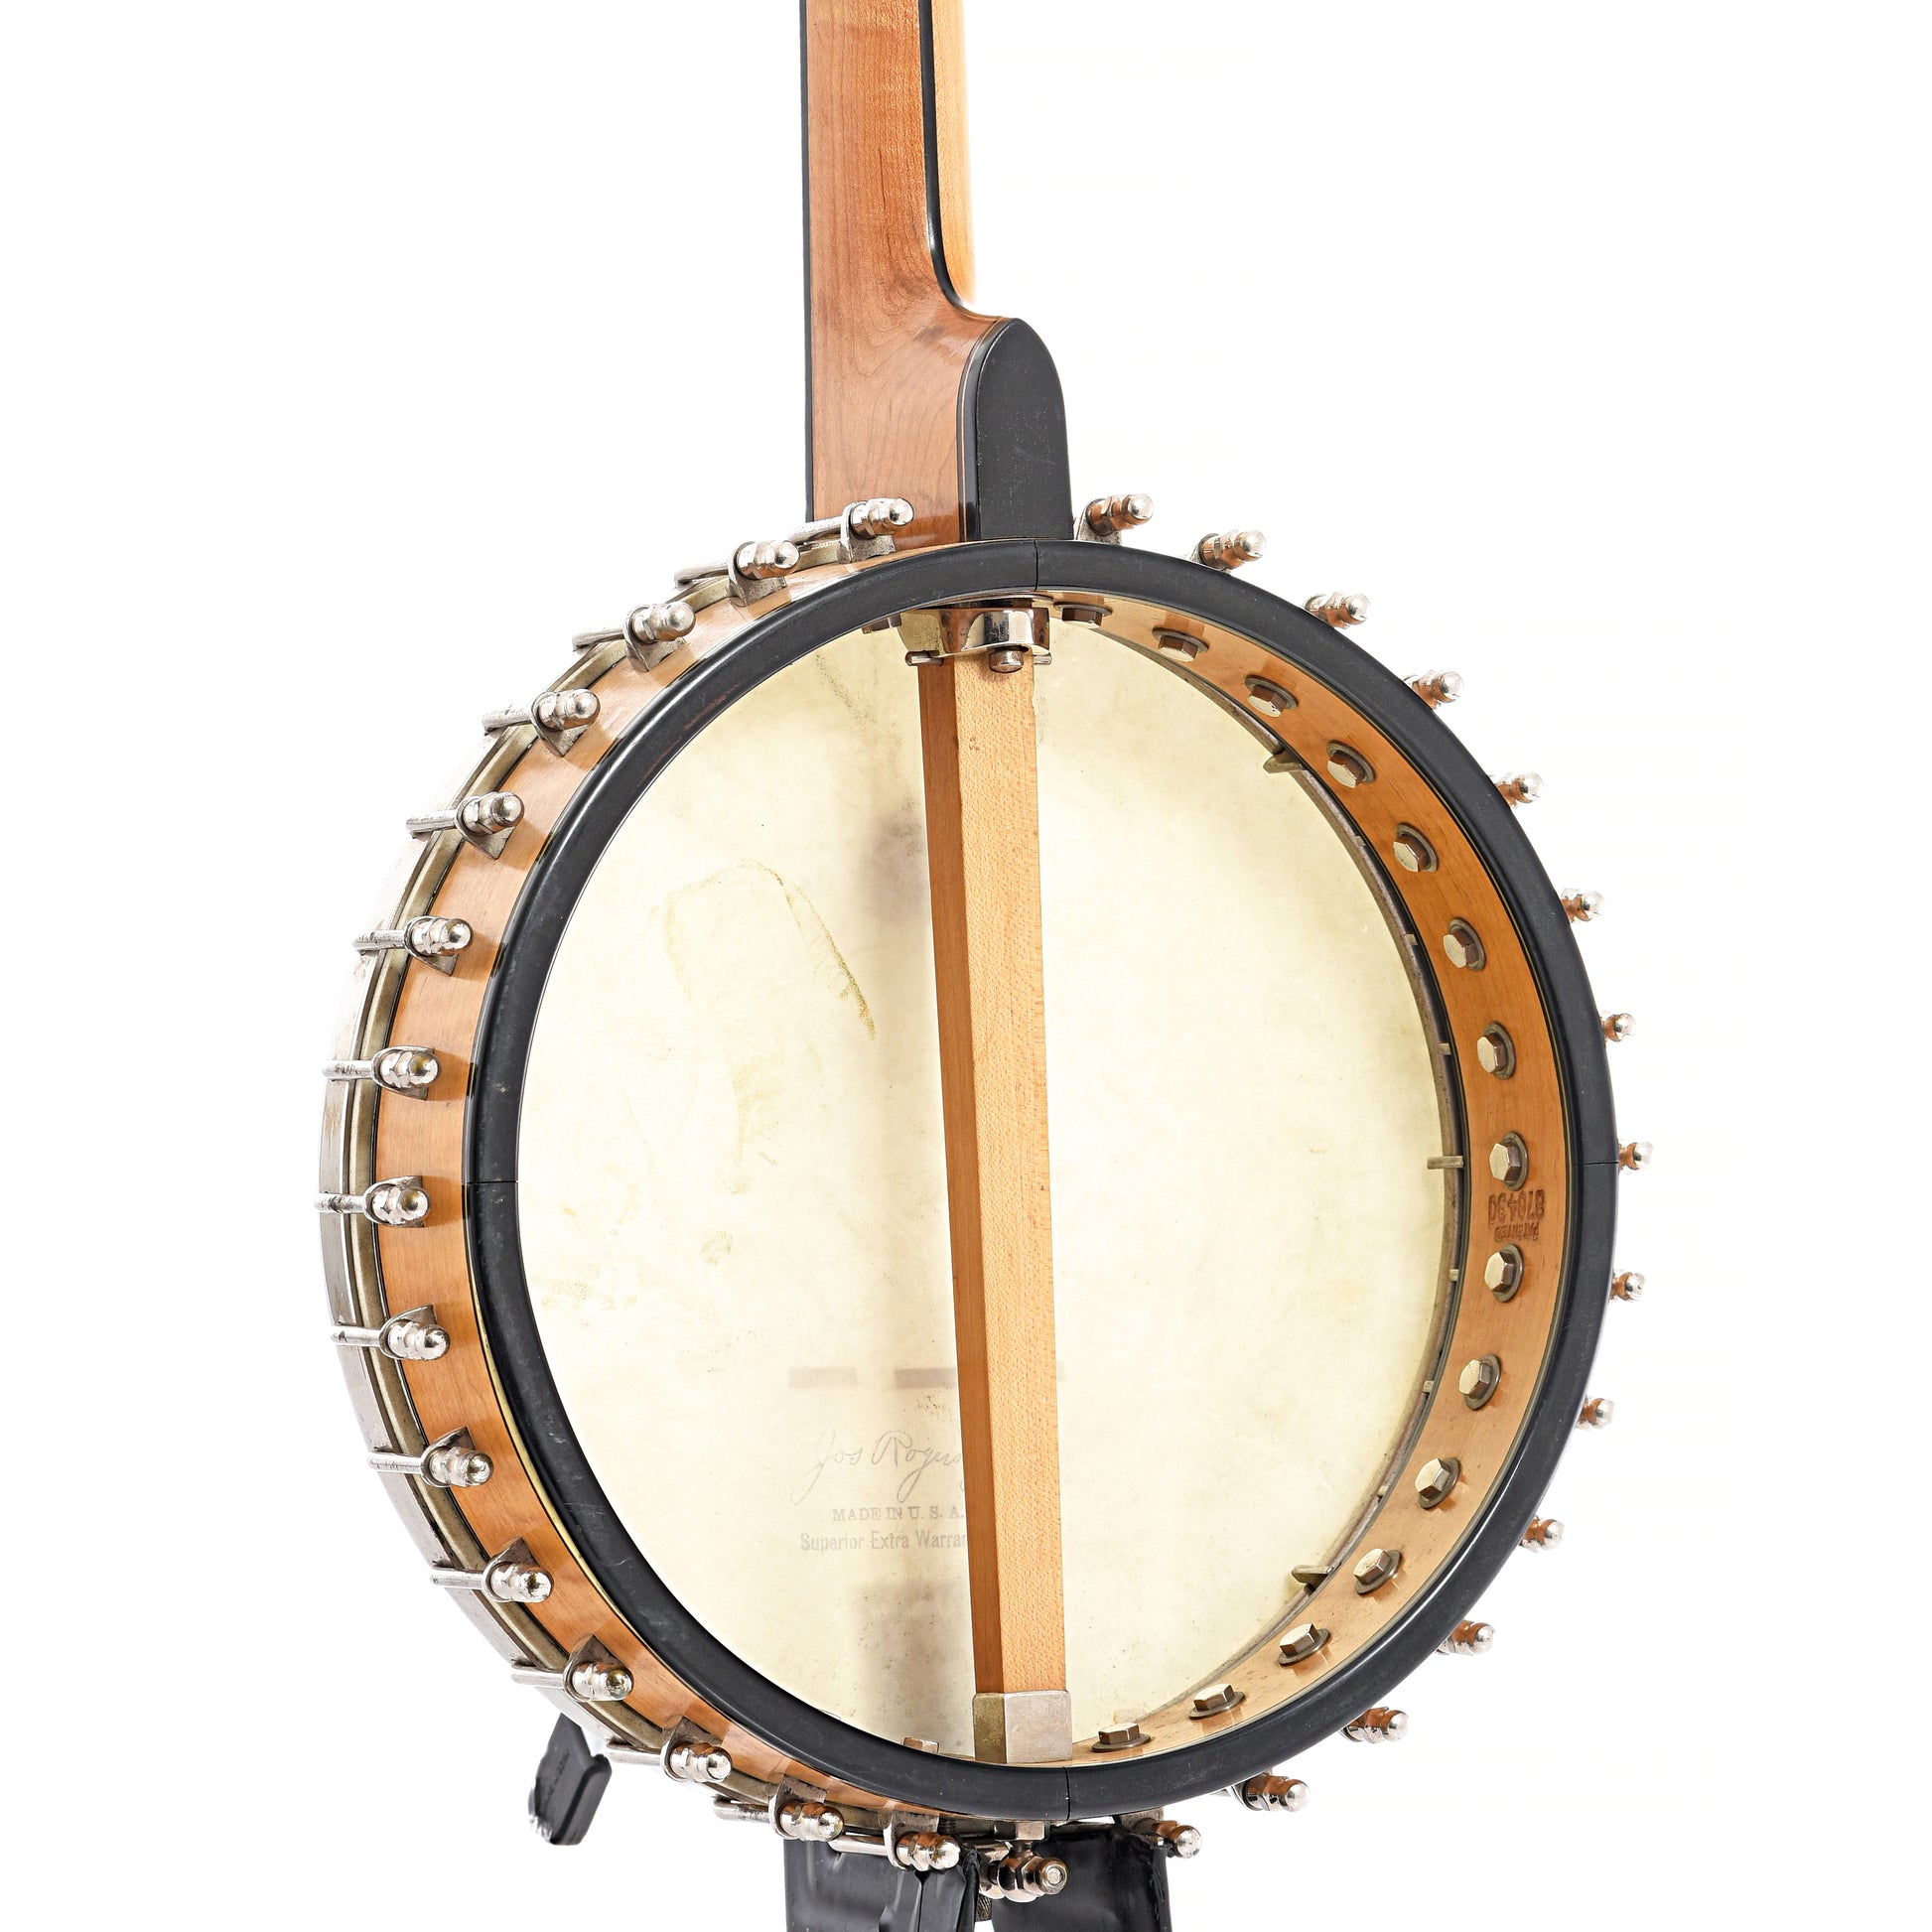 Back and side of Lyon & Healy (UNMARKED) No.475 Tenor Banjo